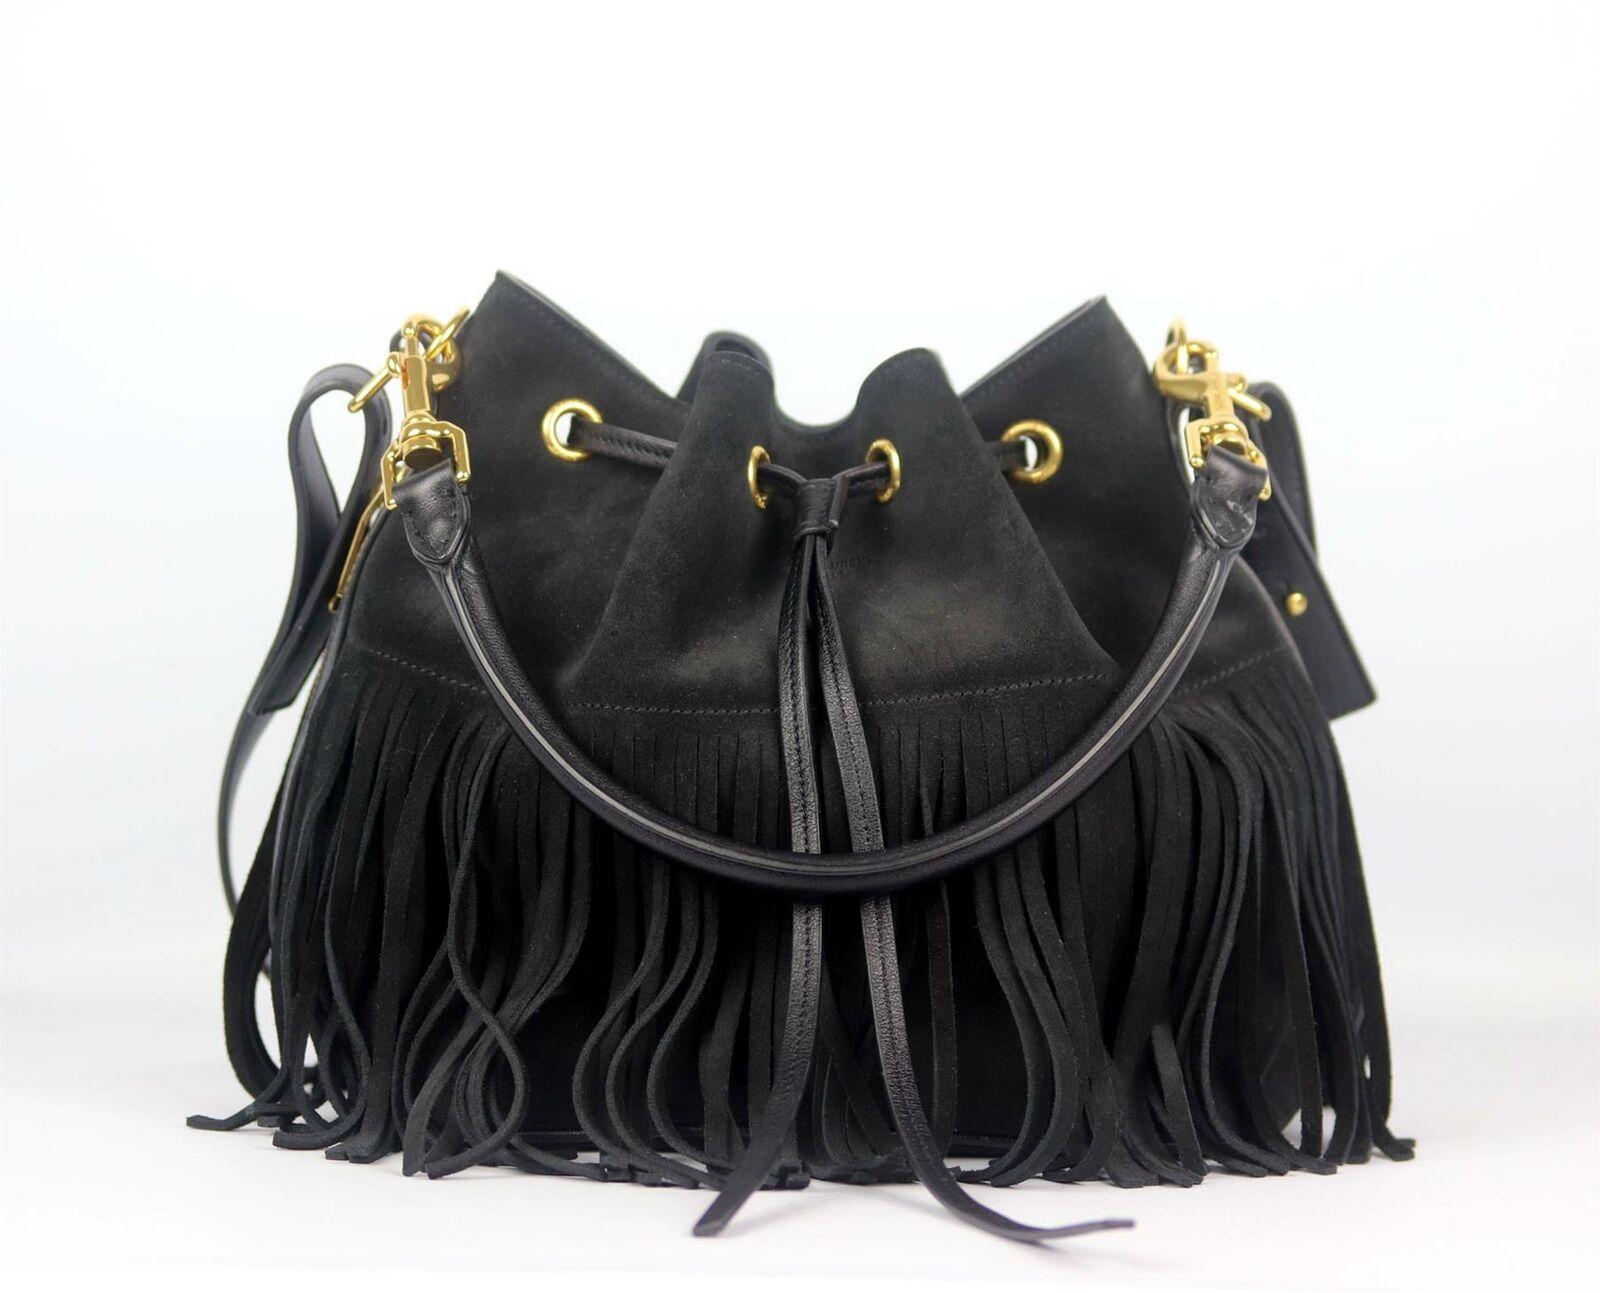 We're obsessed with bucket bags right now, and the 'Emmanuelle' from Saint Laurent is at the top of our wish list, the medium style is coloured in a chic black shade and features retro fringing that's perfectly in touch with the season's '70s vibe.